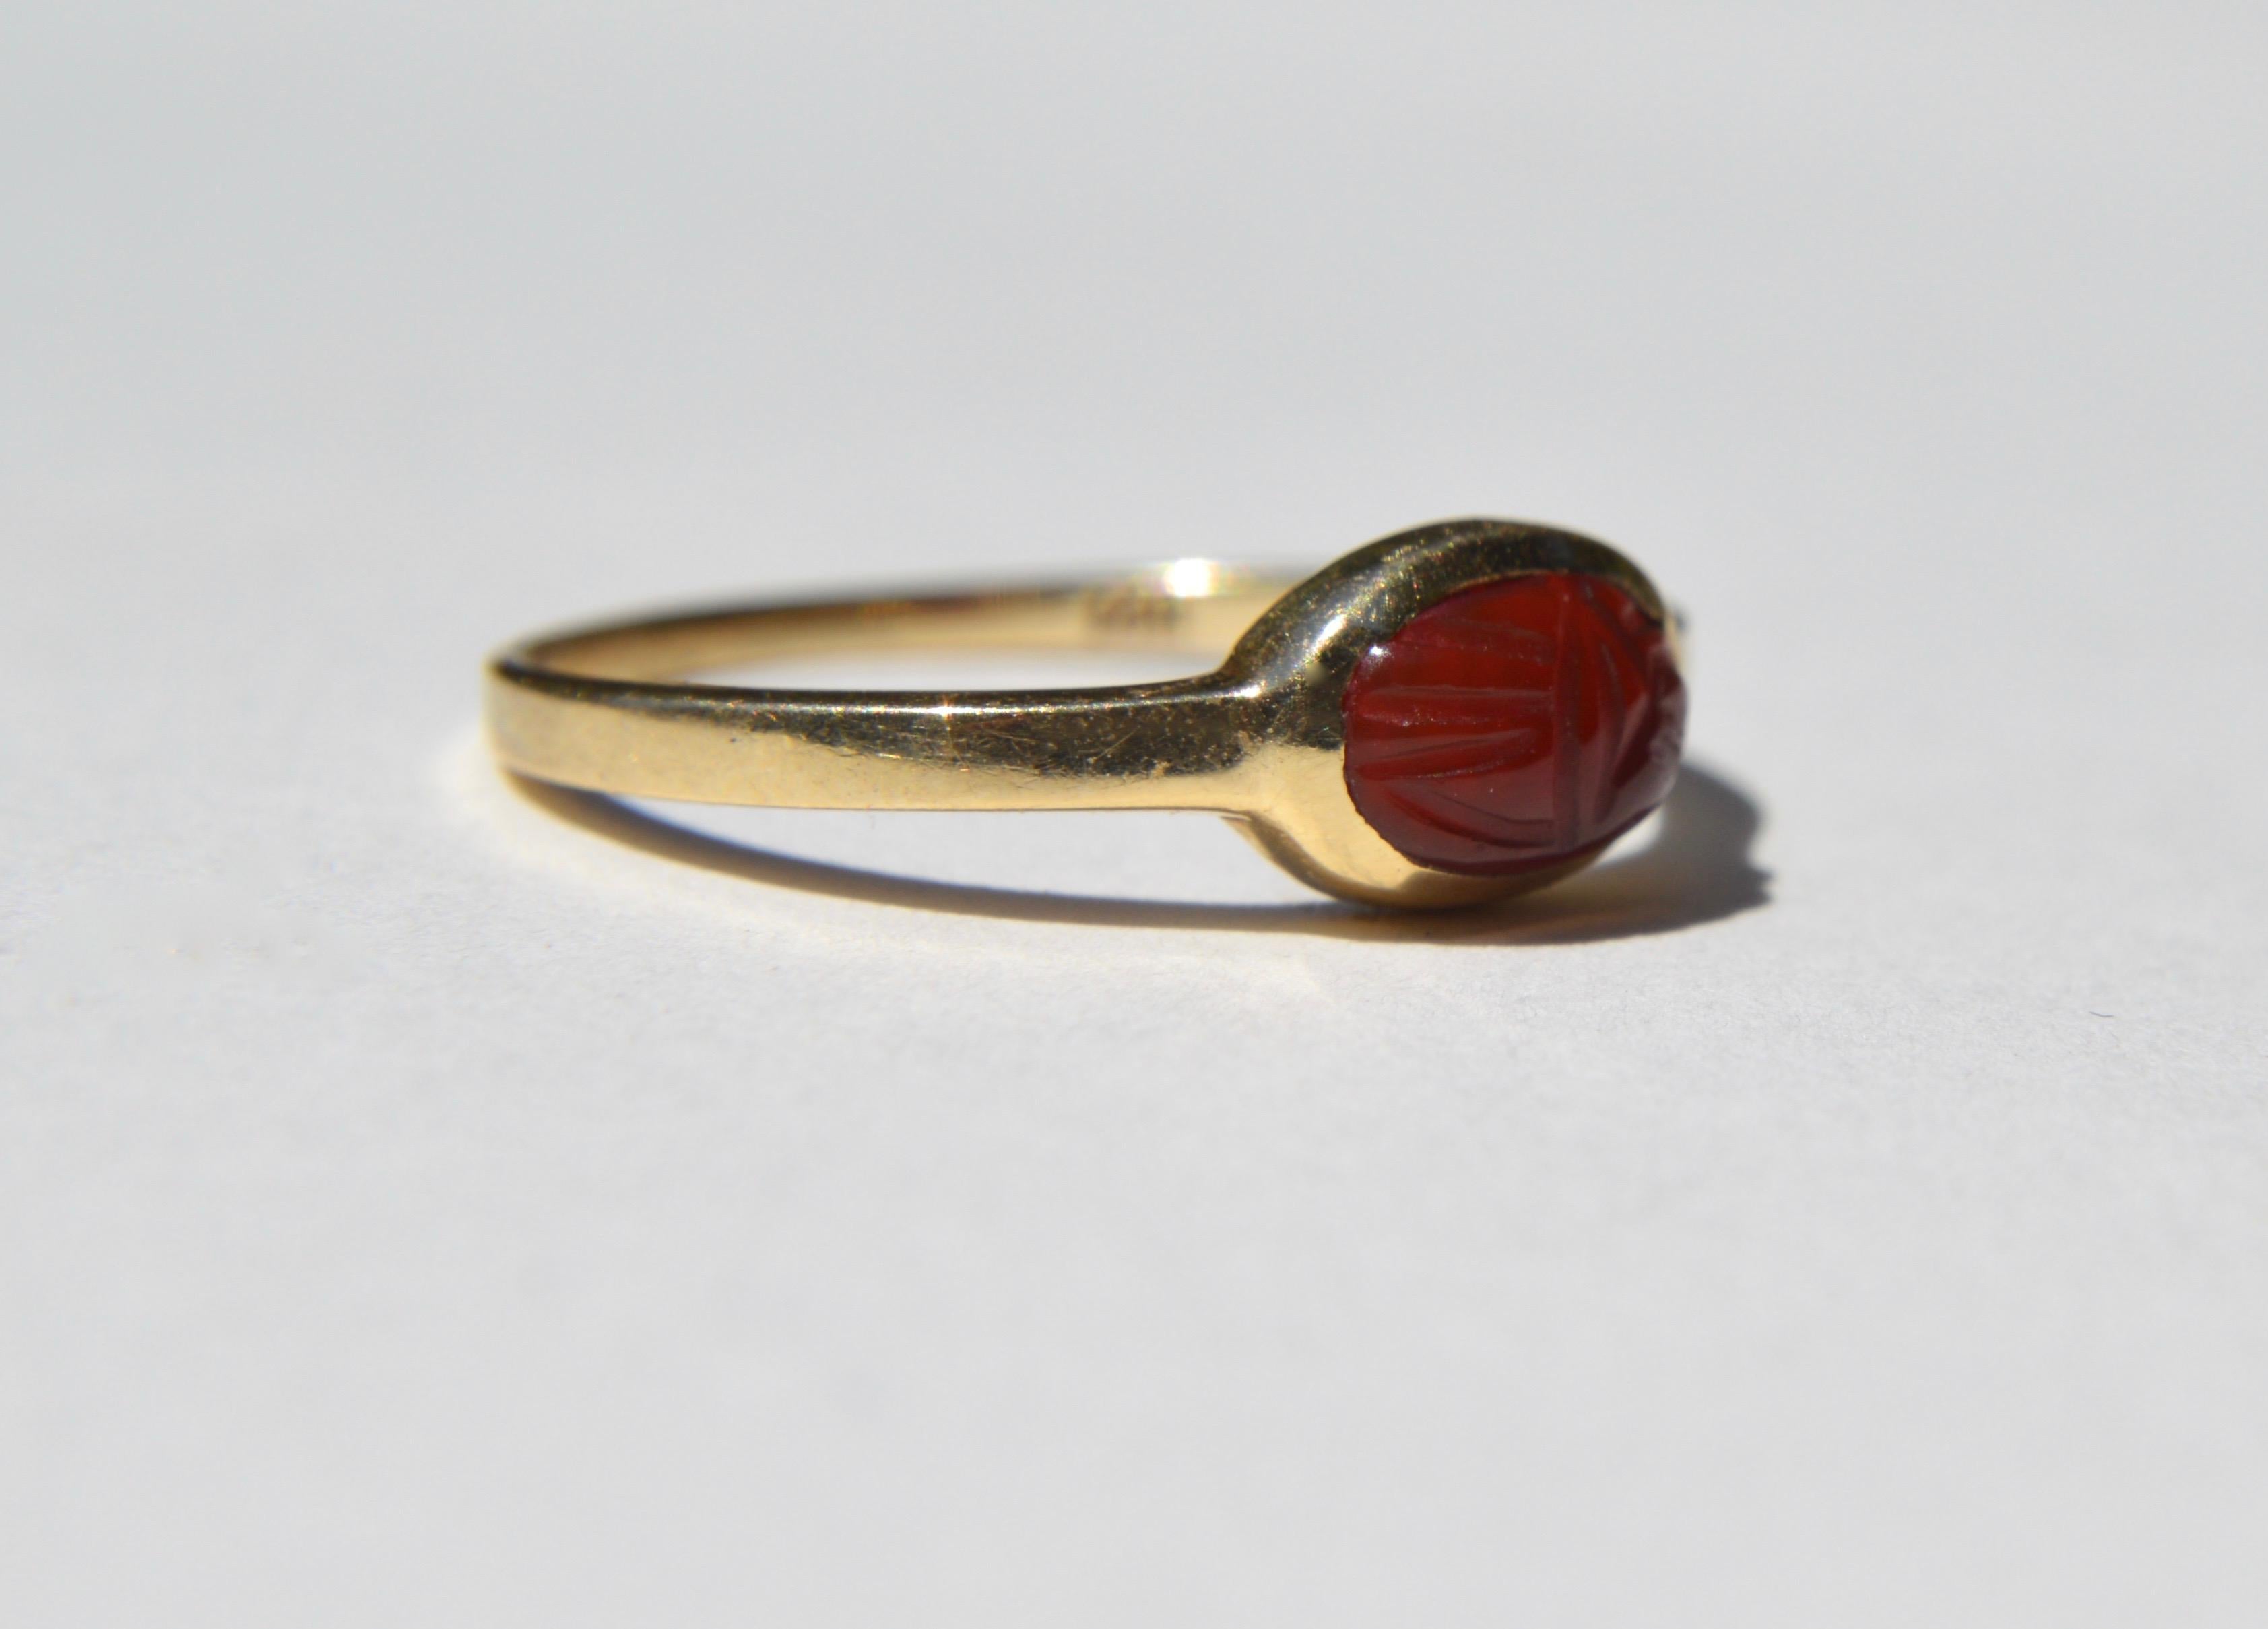 Lovely vintage 14K yellow gold hand carved carnelian Egyptian revival scarab beetle ring. Carnelian cabochon measures 8x5mm, 1.1 carats. In very good condition. Marked as 14K gold. Size 7, can be resized by a jeweler.

Over the history and religious